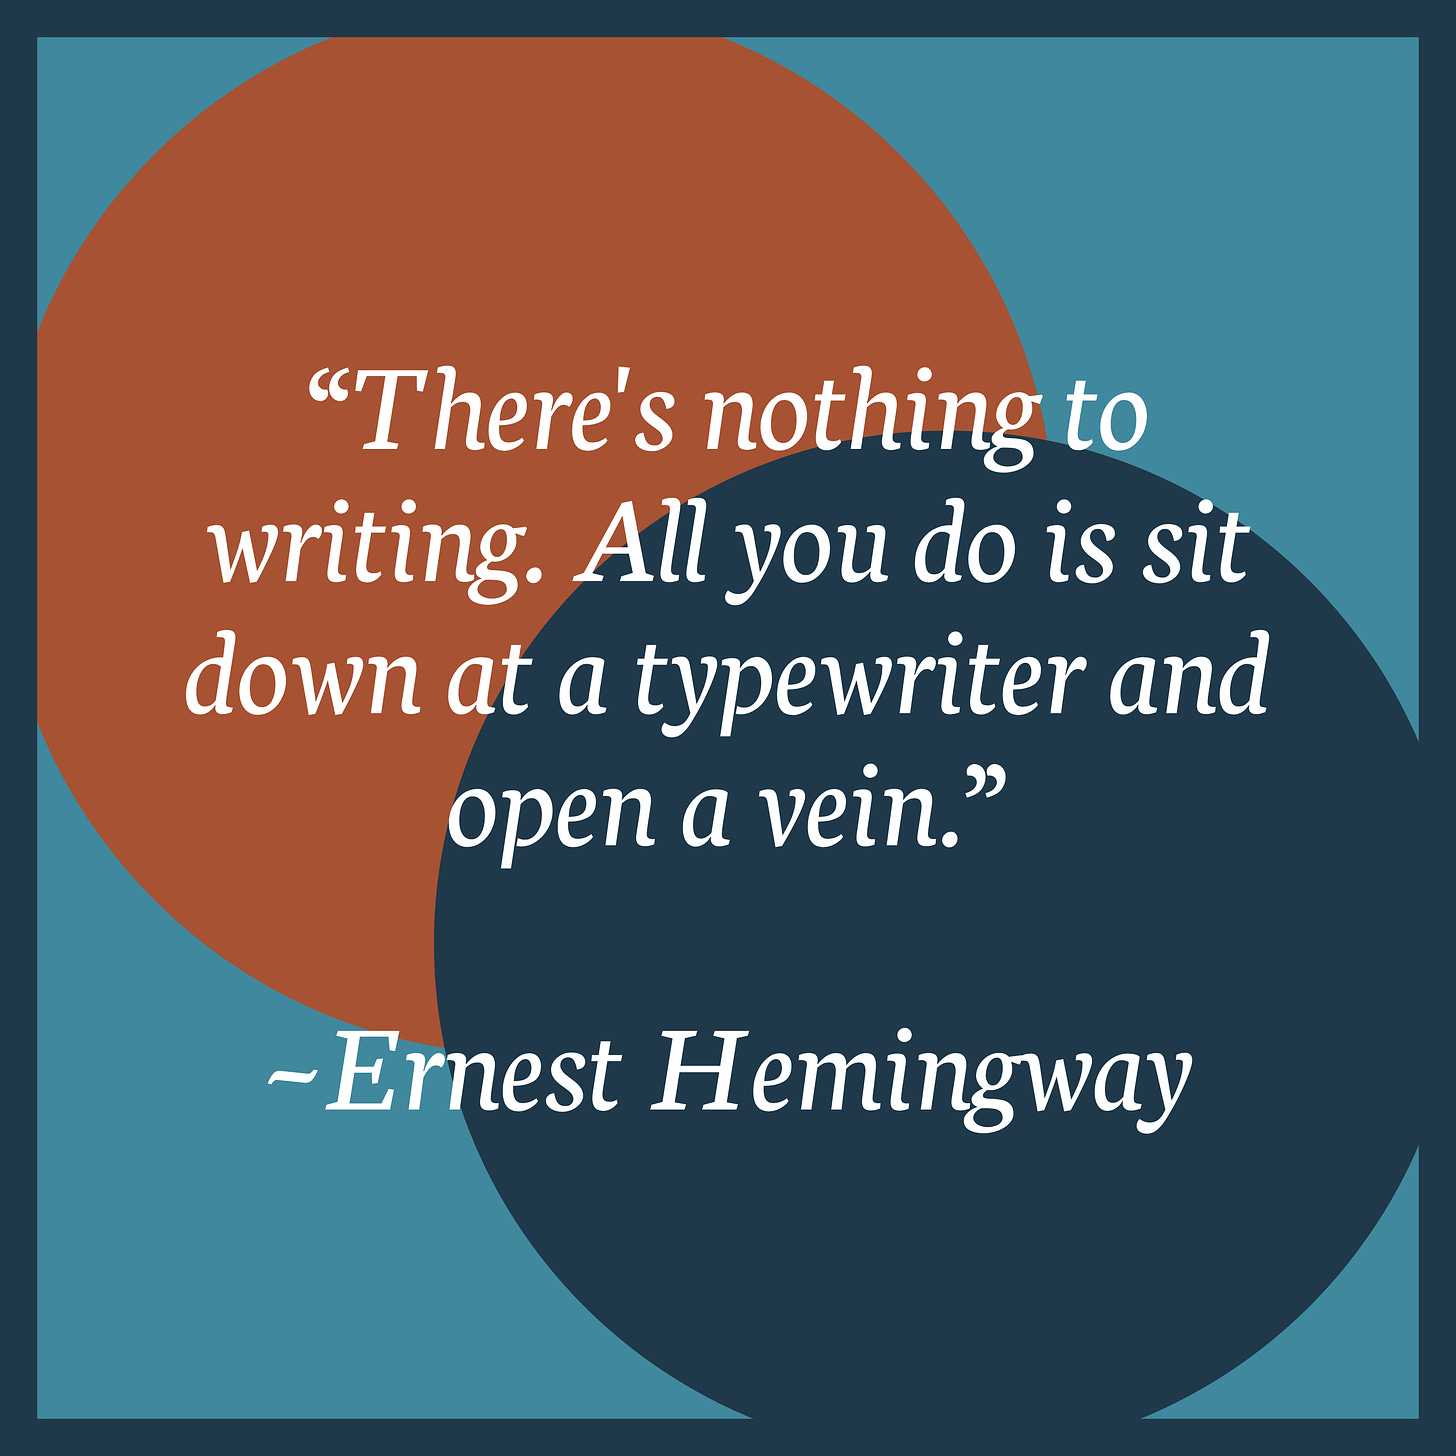 There's nothing to writing. All you do is sit down at a typewriter and open a vein. Ernest Hemmingway